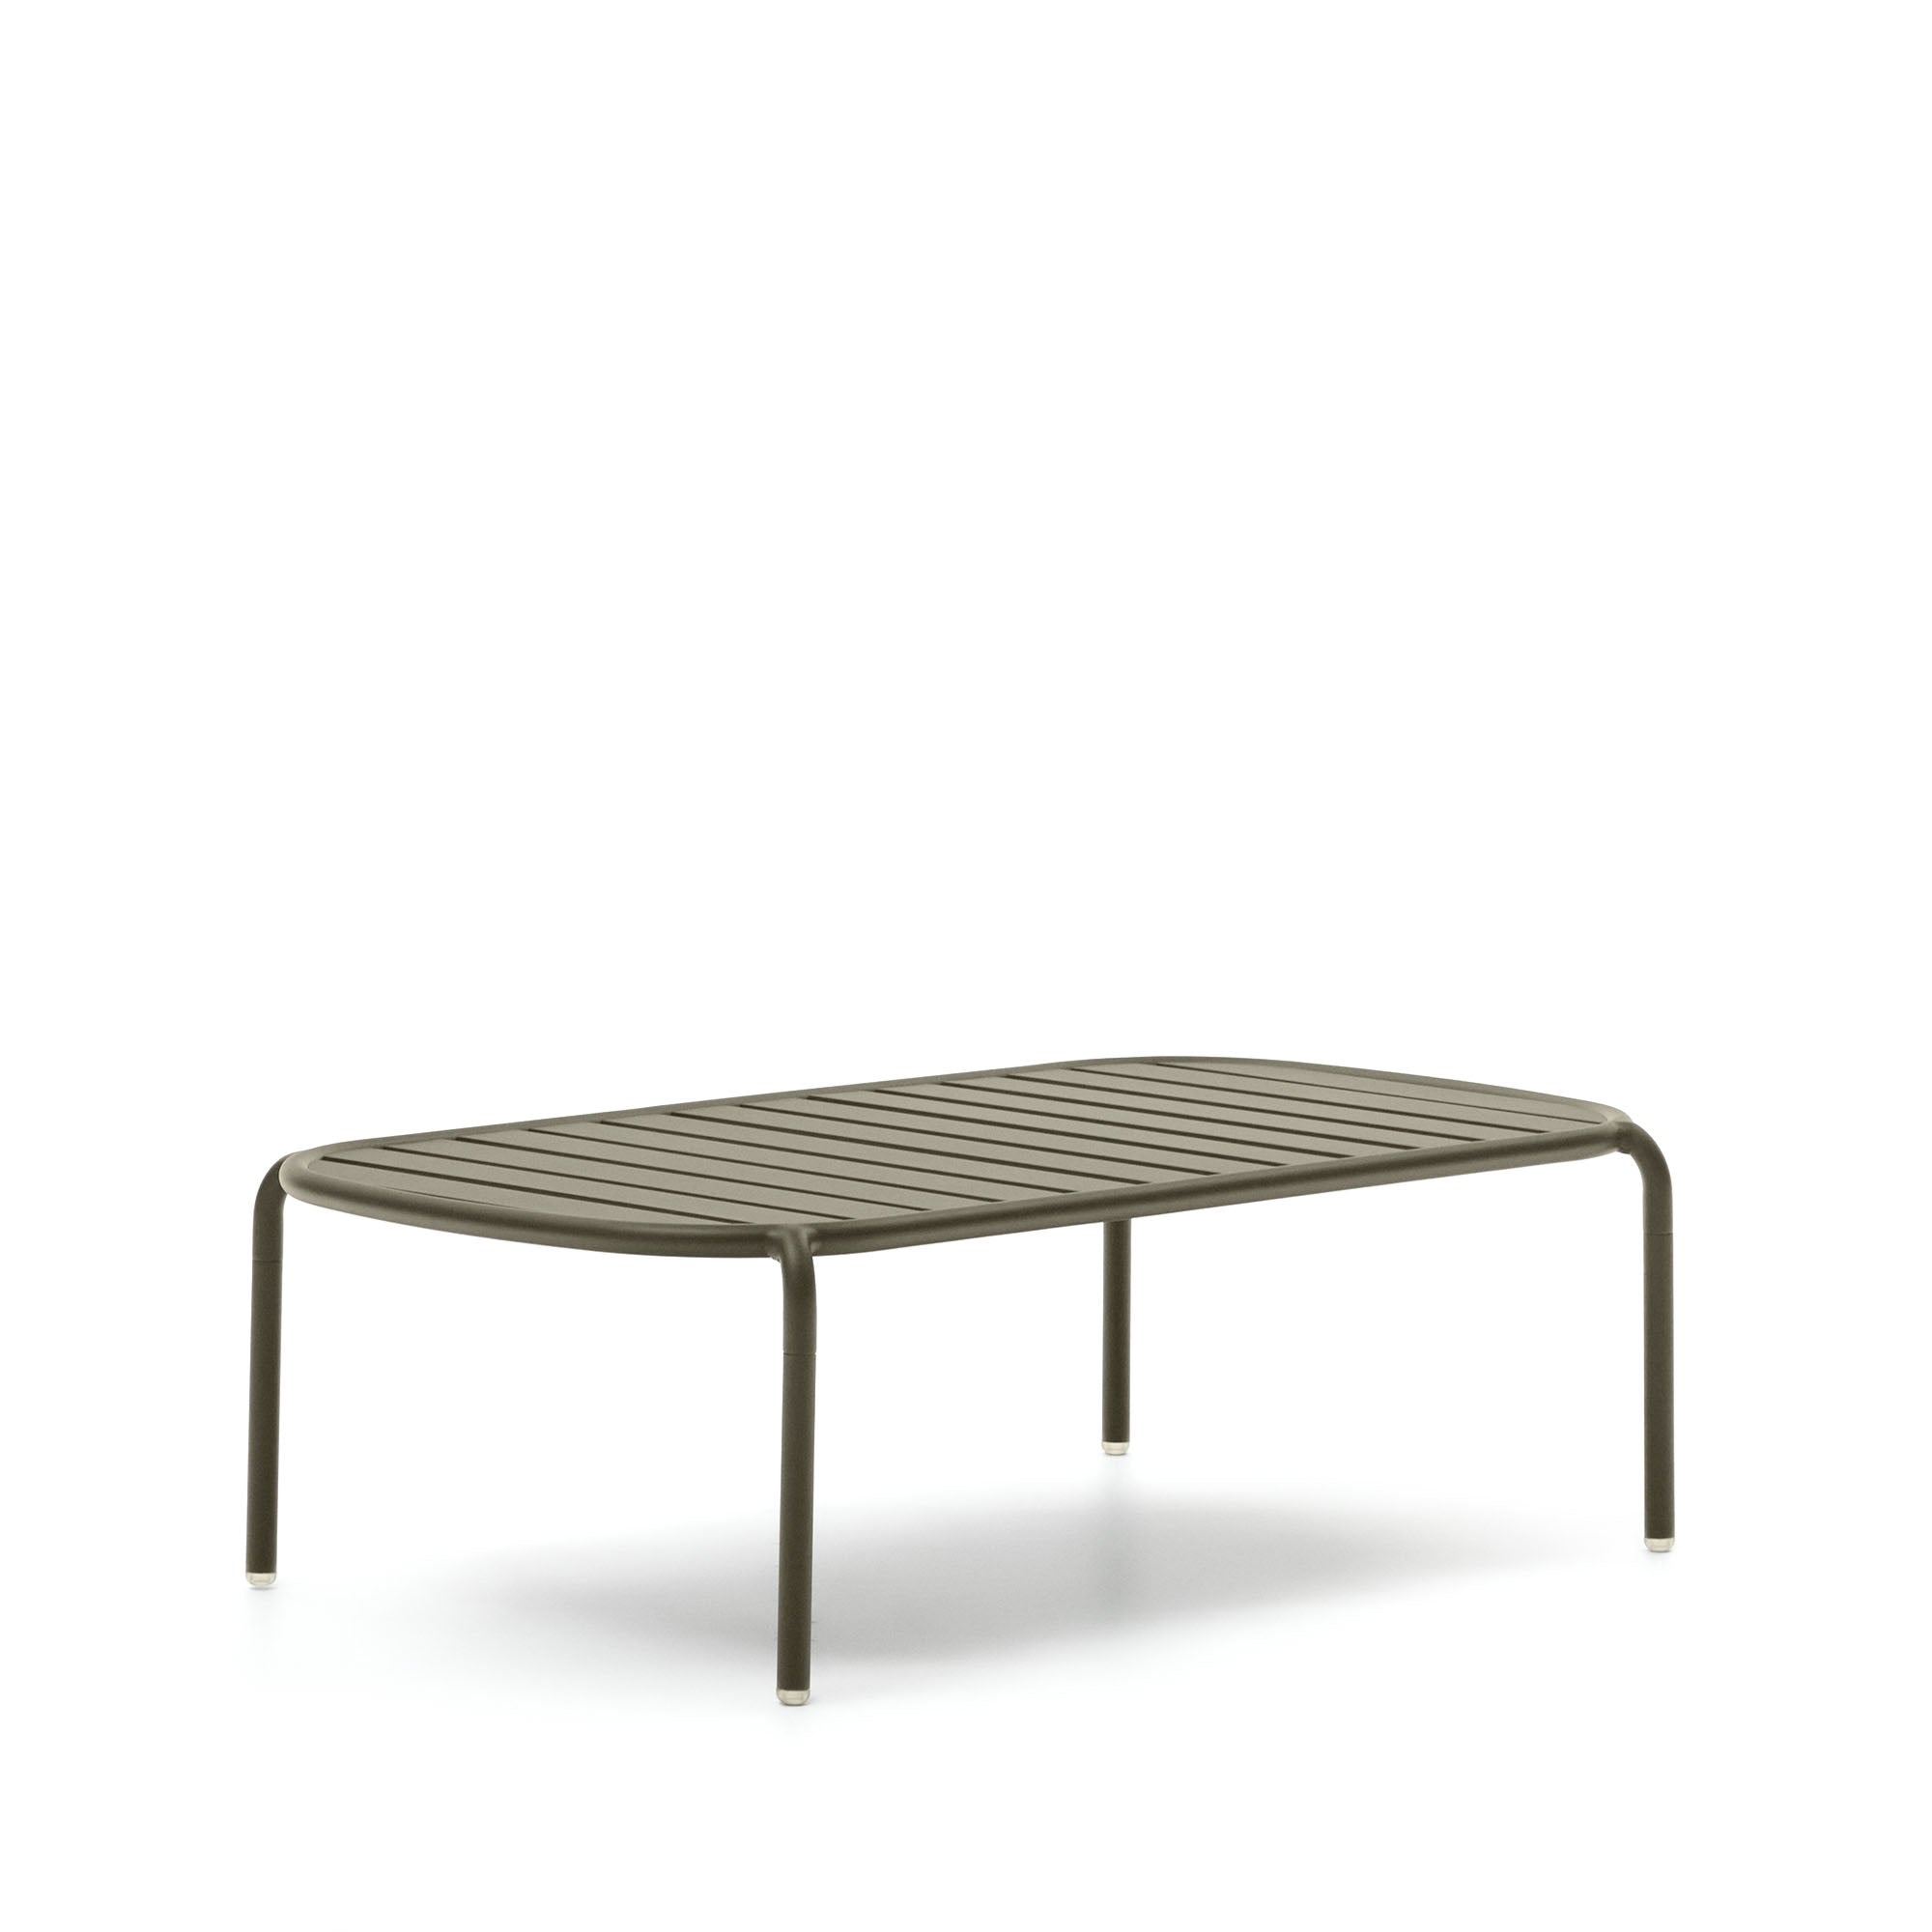 Joncols outdoor aluminium coffee table with powder coated green finish, Ø 110 x 62 cm